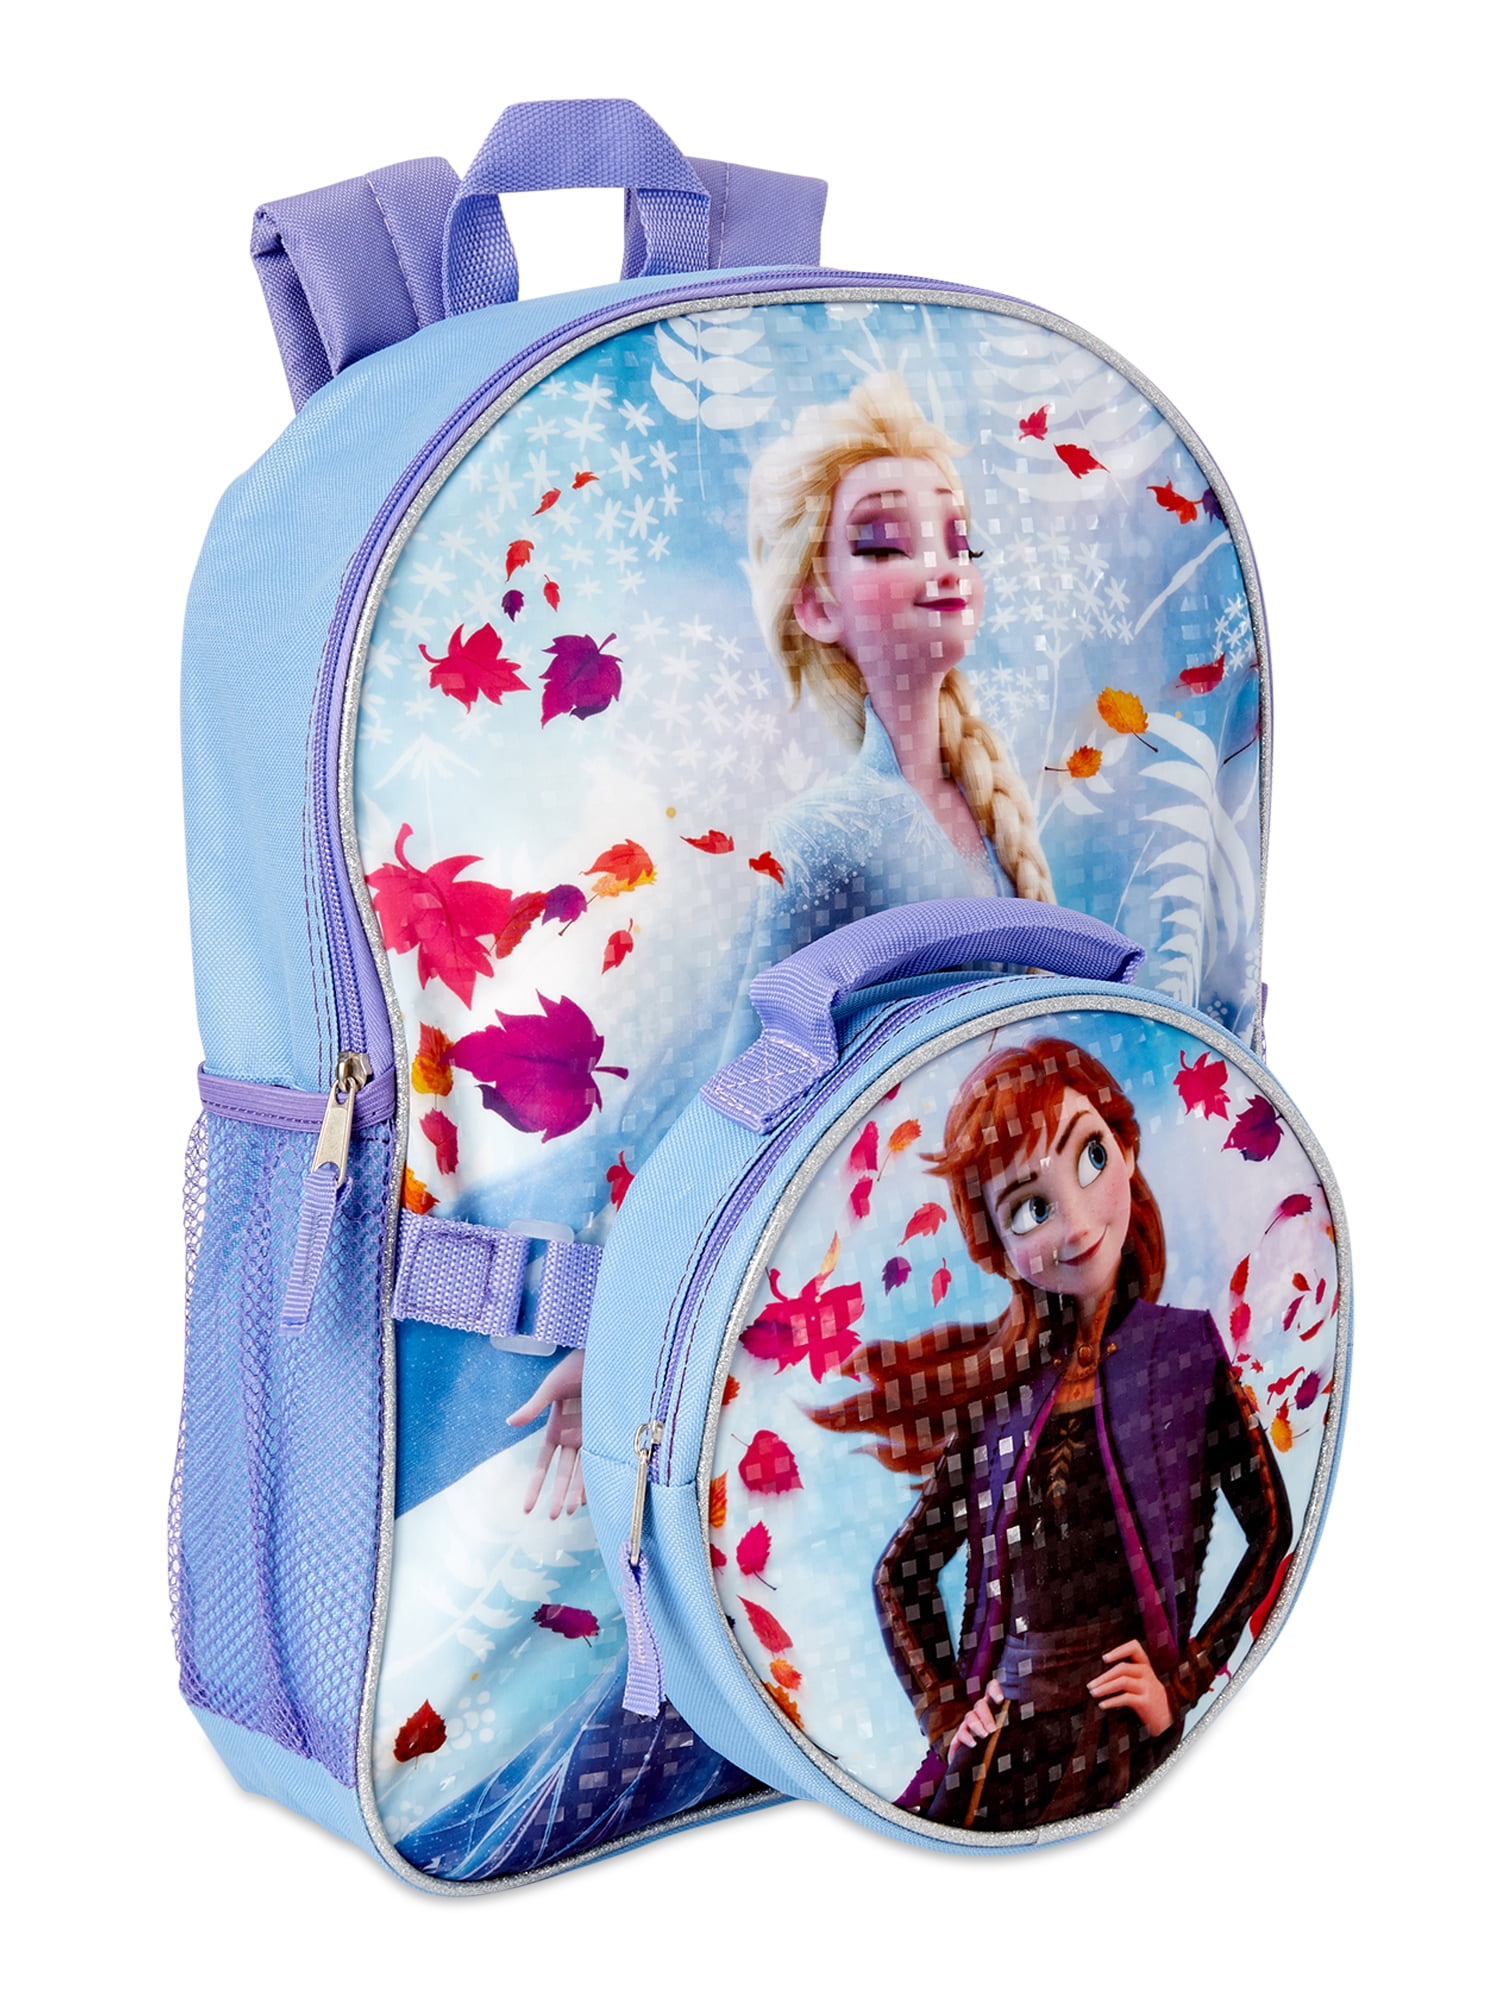 Disney Frozen 2 Kids Girls Change Is in the Air Backpack with Lunch Bag aee1147f cf6e 4446 ac21 fc0aae0caf31.65d60d2b5d80f12c3c22fdf5285a0559